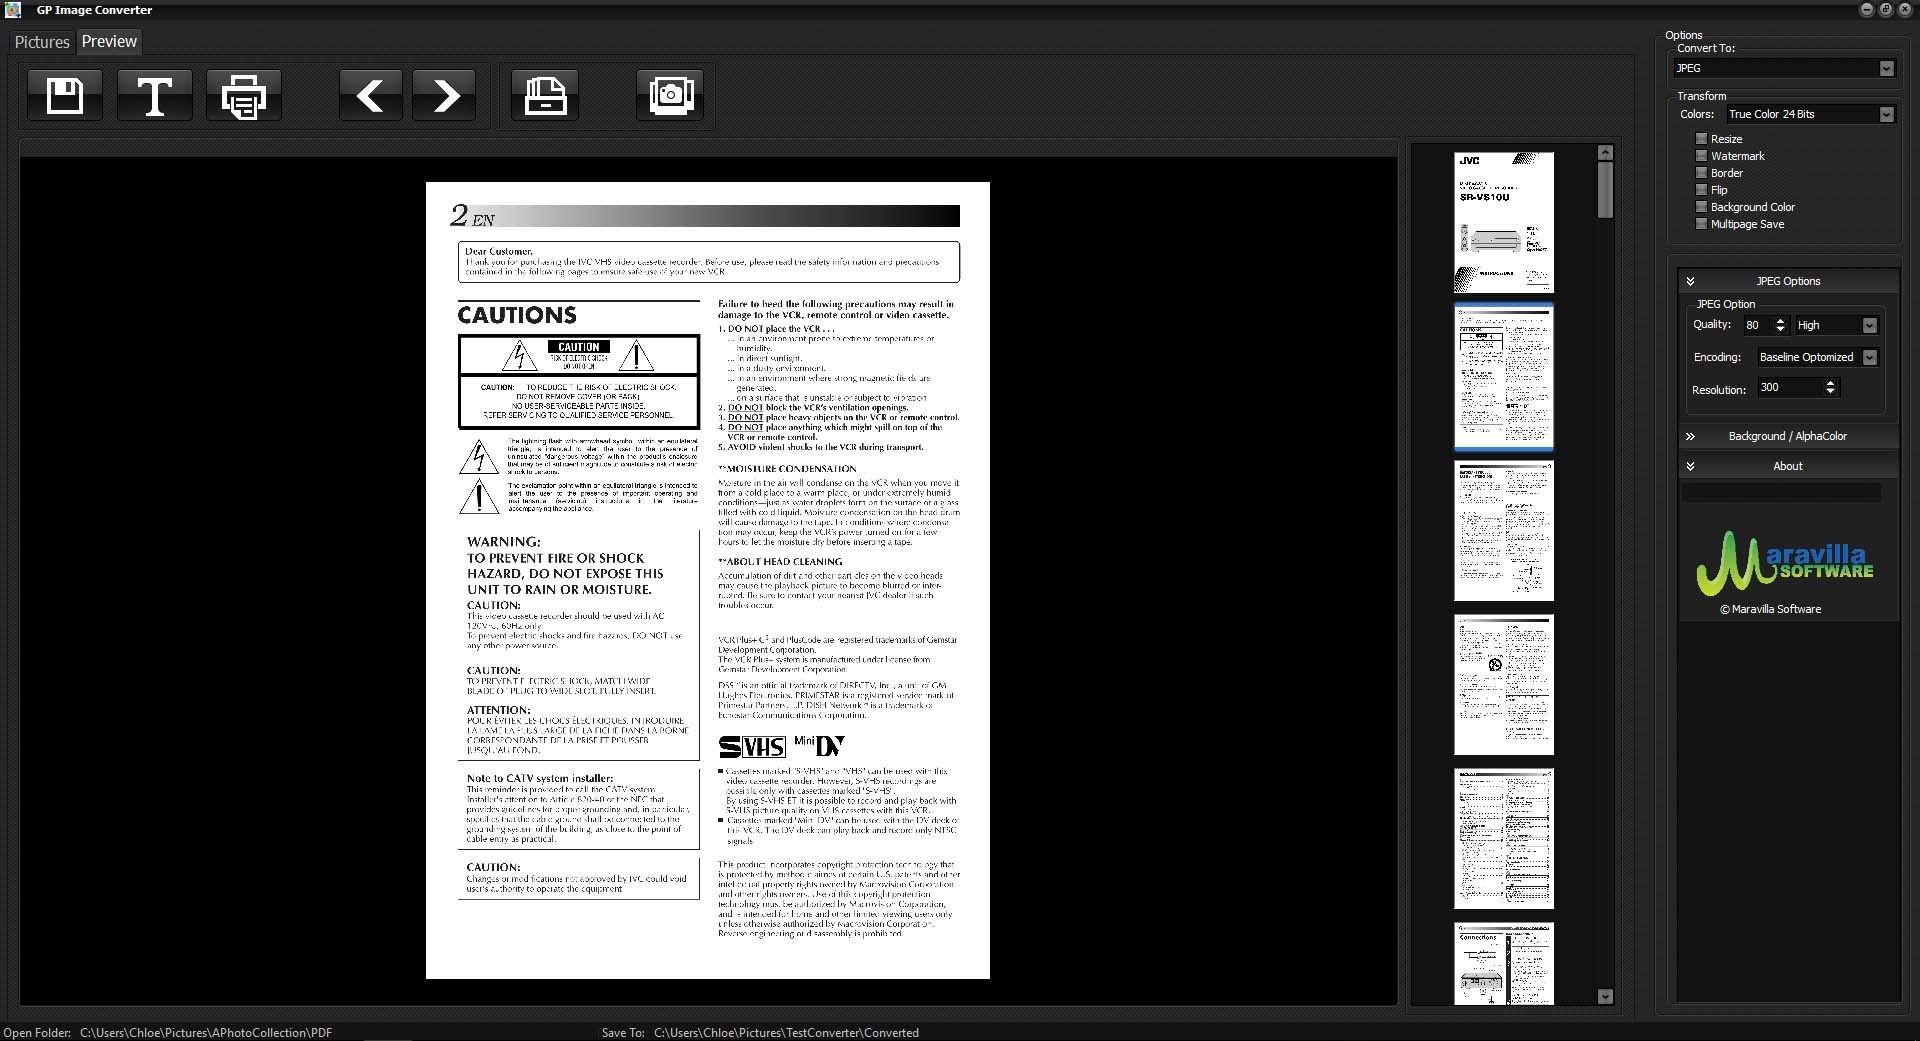 View PDF files, Save Pages as Pictures